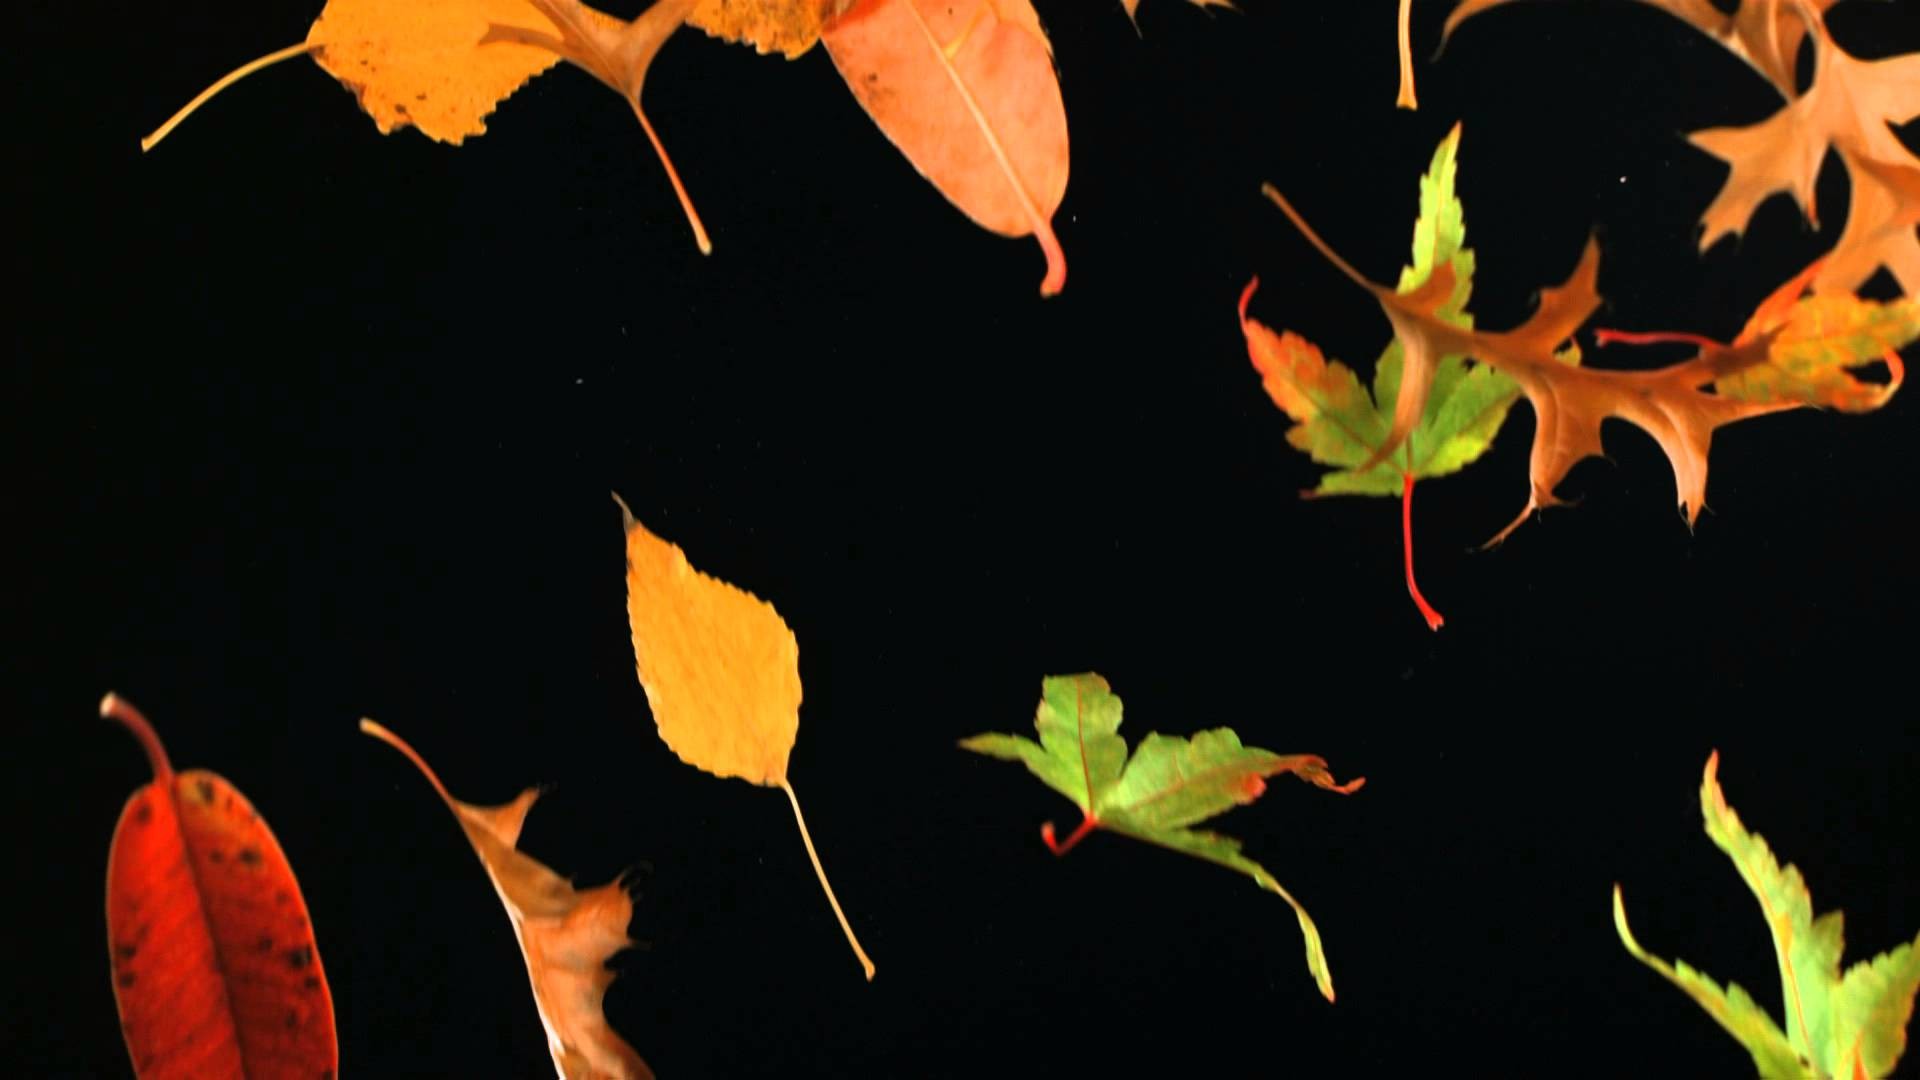 1920x1080 Slow Motion Falling Leaves and Autumn Leaf Fall Shot in Slow Mo High  Definition HD Black Background - YouTube